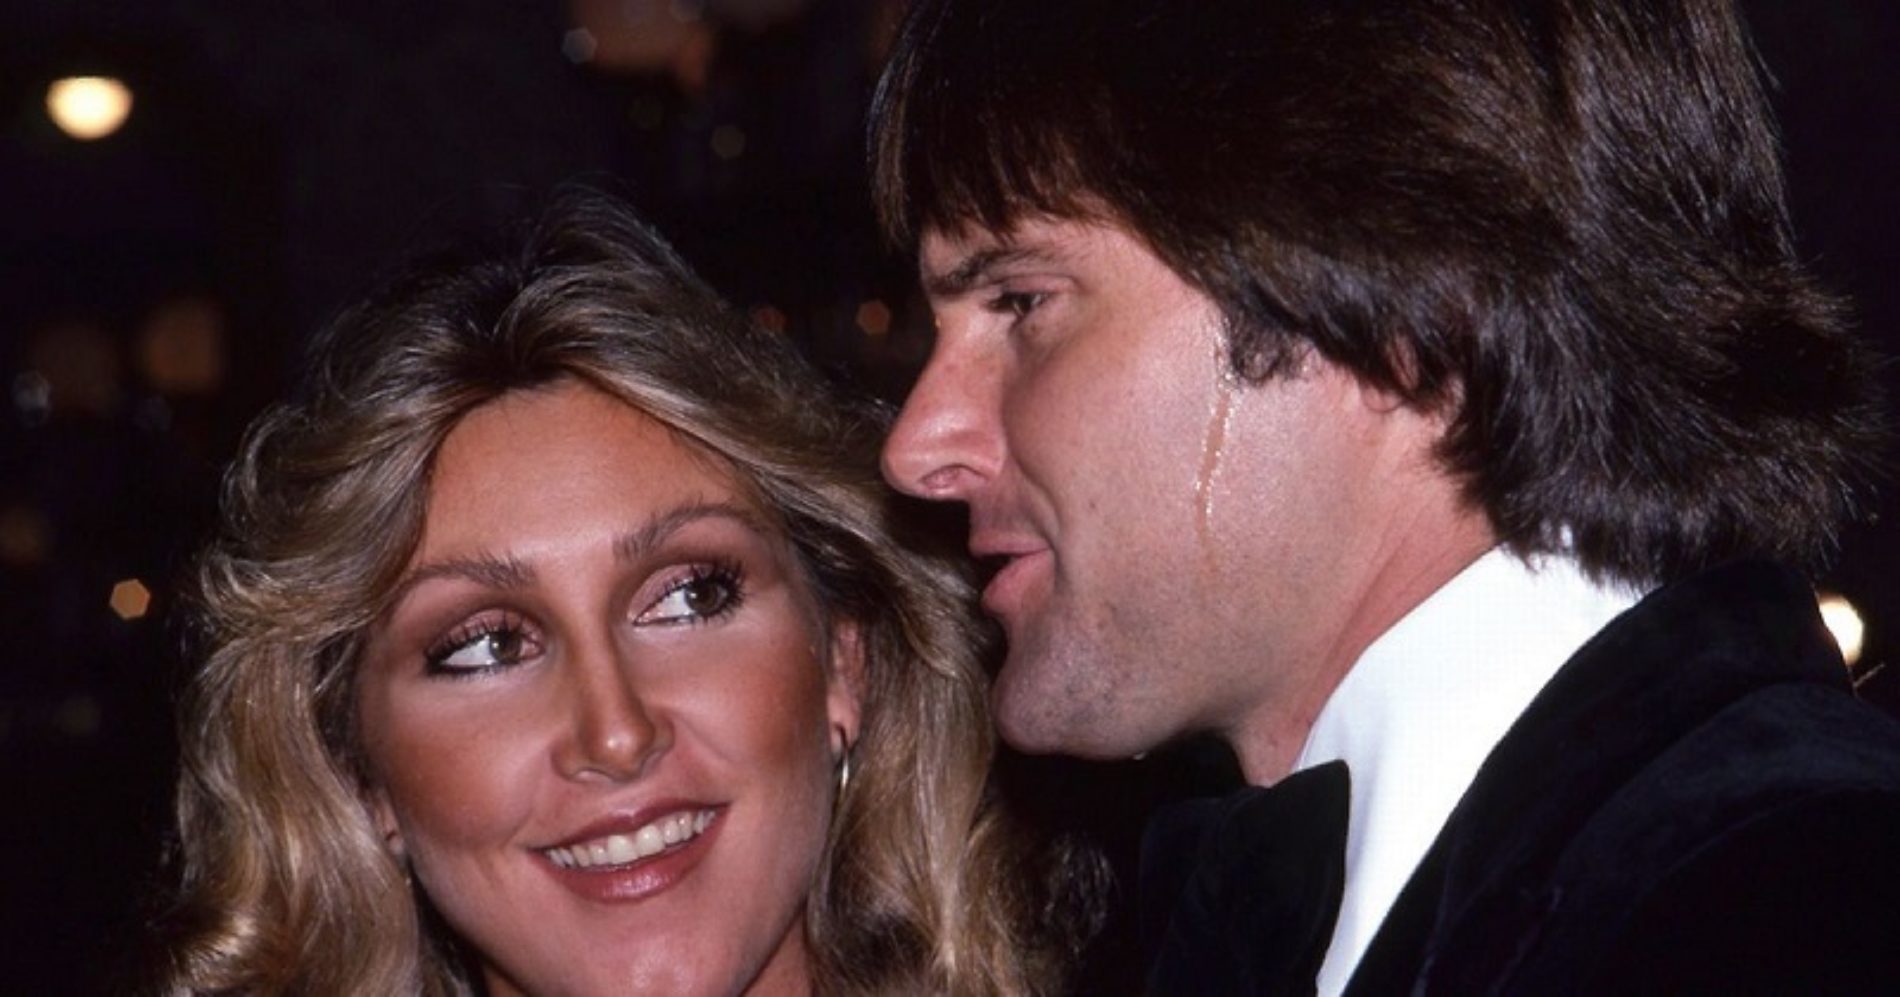 Five things Caitlyn Jenner’s ex-wife revealed about her in a new book